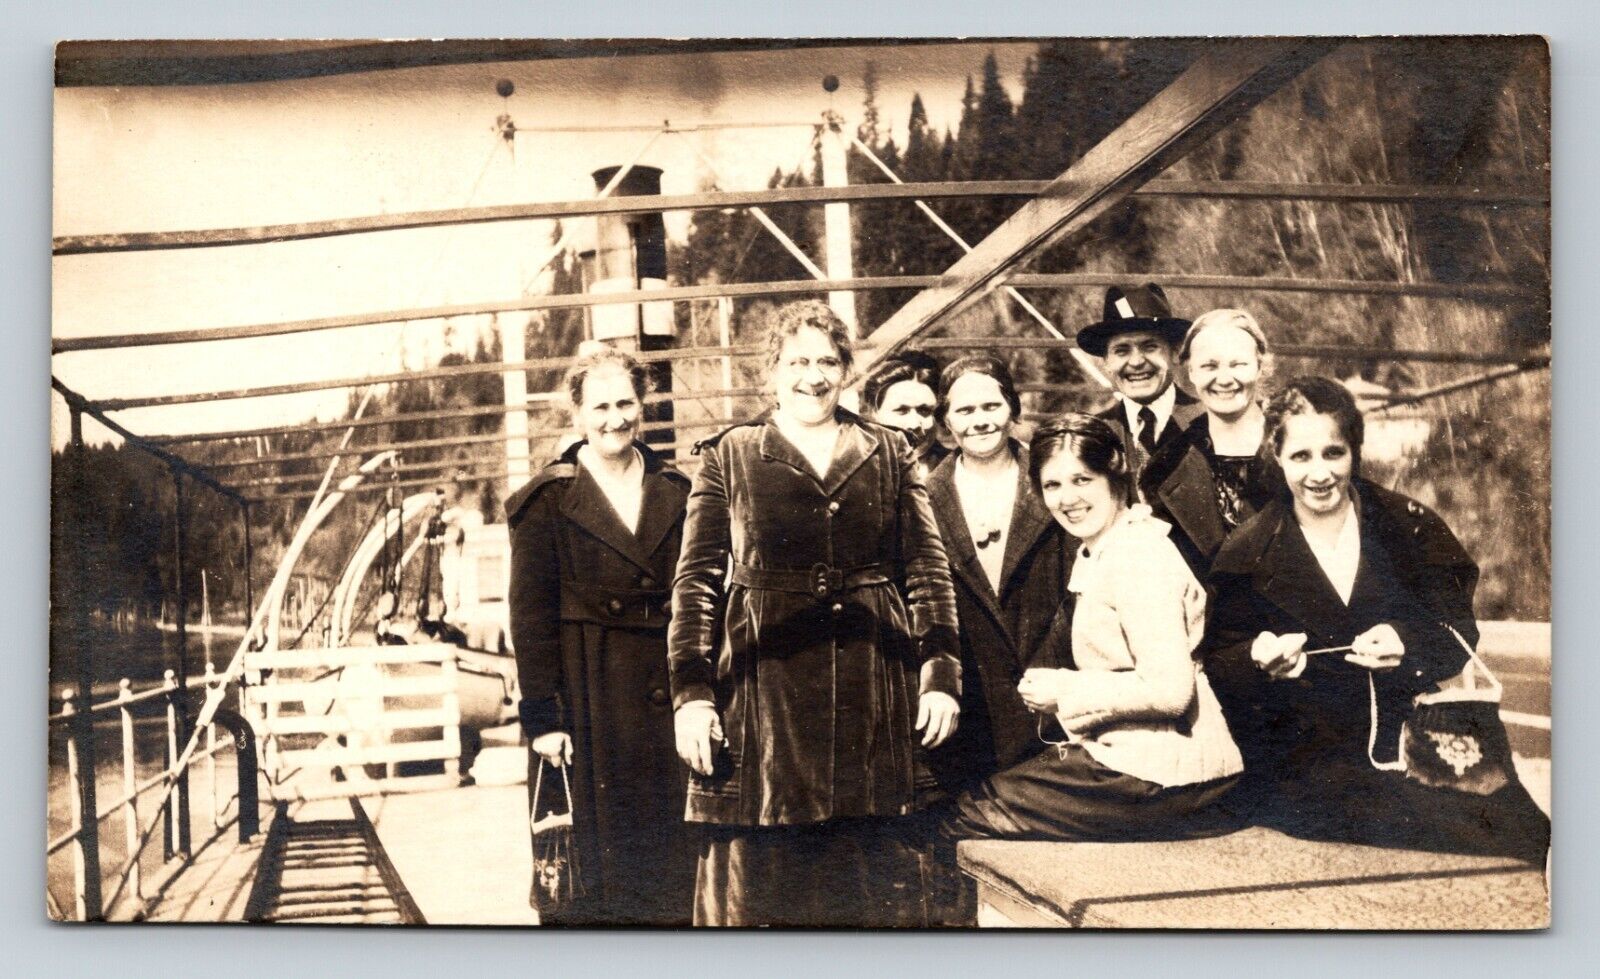 RPPC Group of Fun Looking People On Boat FASHION CLASSIC IMAGE Vintage Postcard